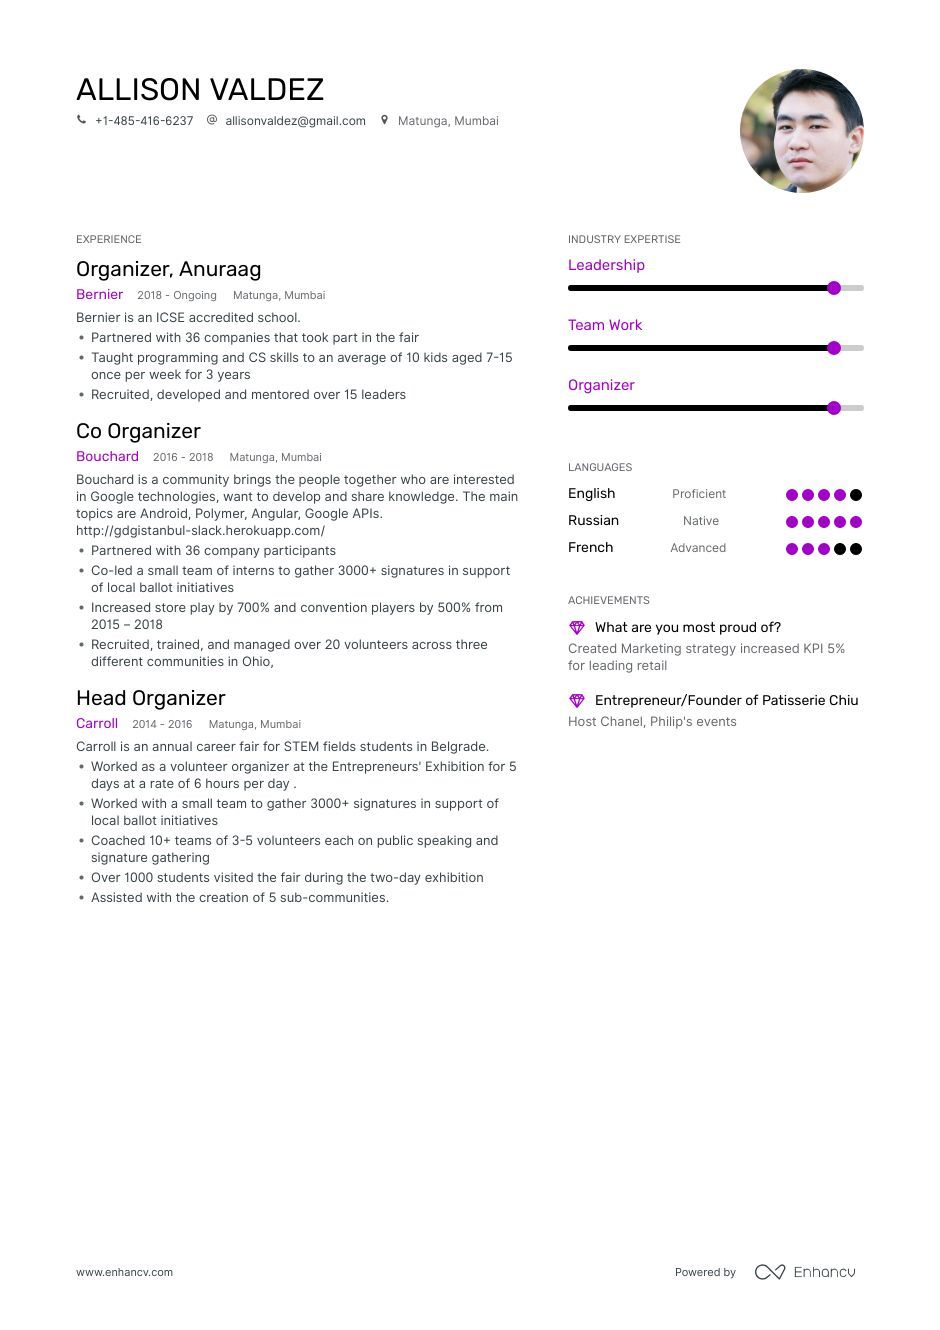 Top Organizer Resume Examples Samples For 2020 Resume intended for dimensions 940 X 1330